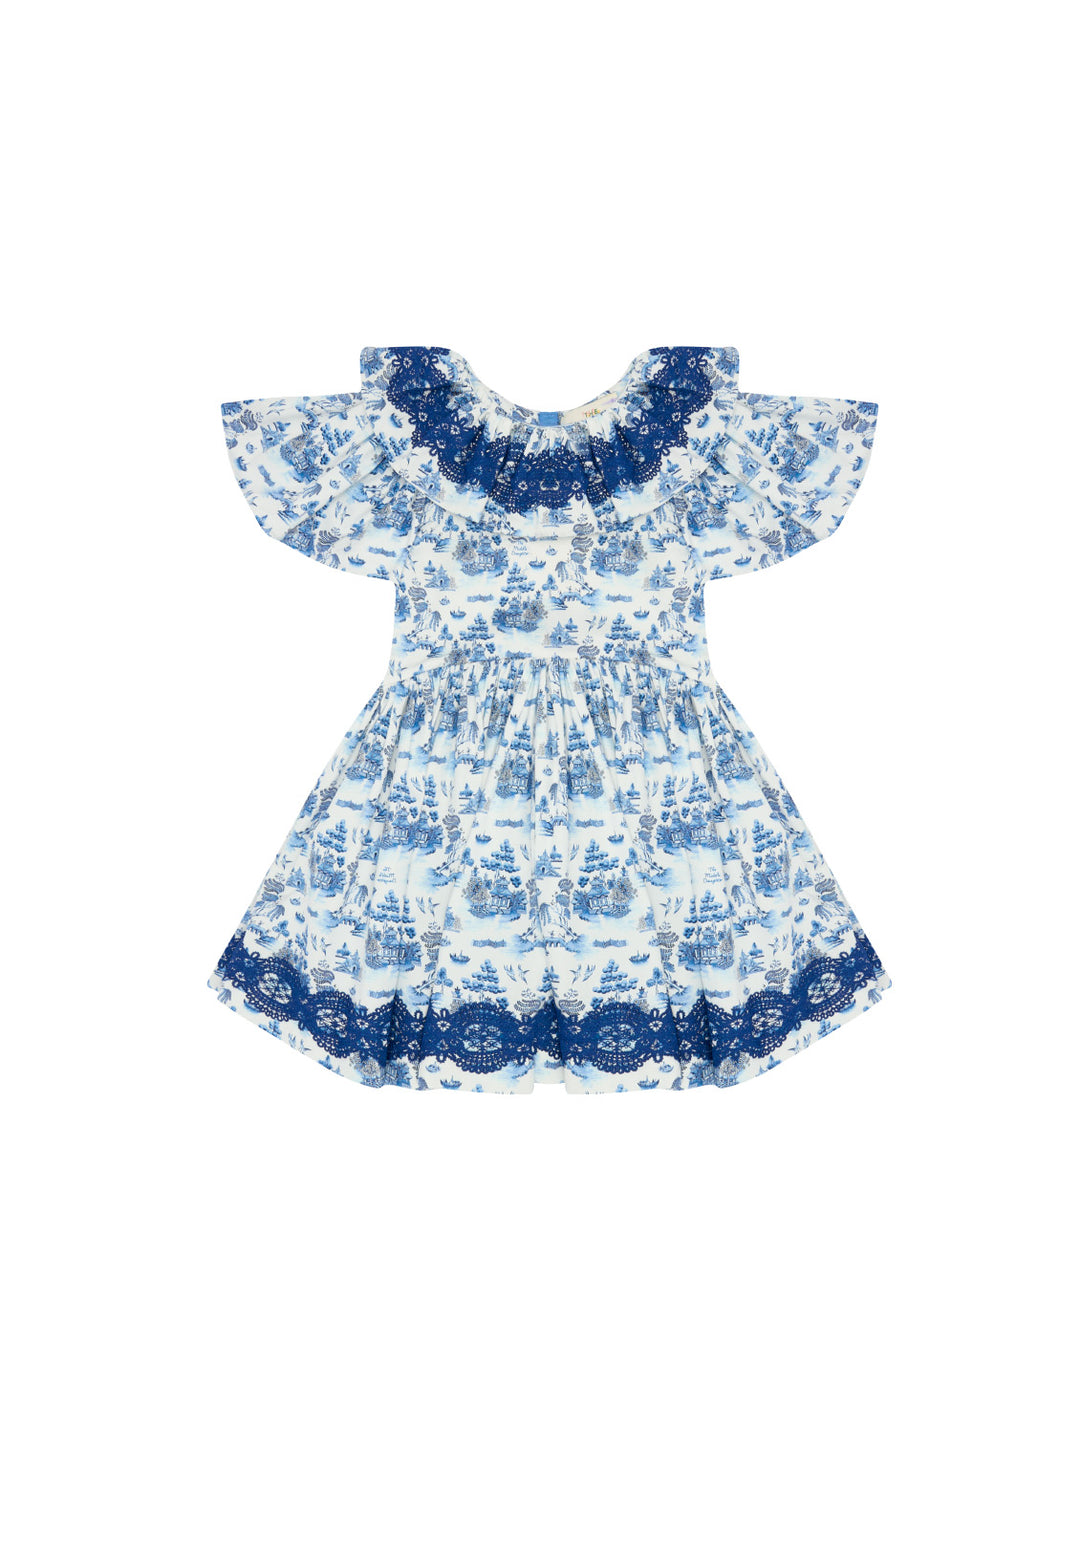 FORGET ME NOT DRESS-LONG SLEEVE-WILLOW PATTERN